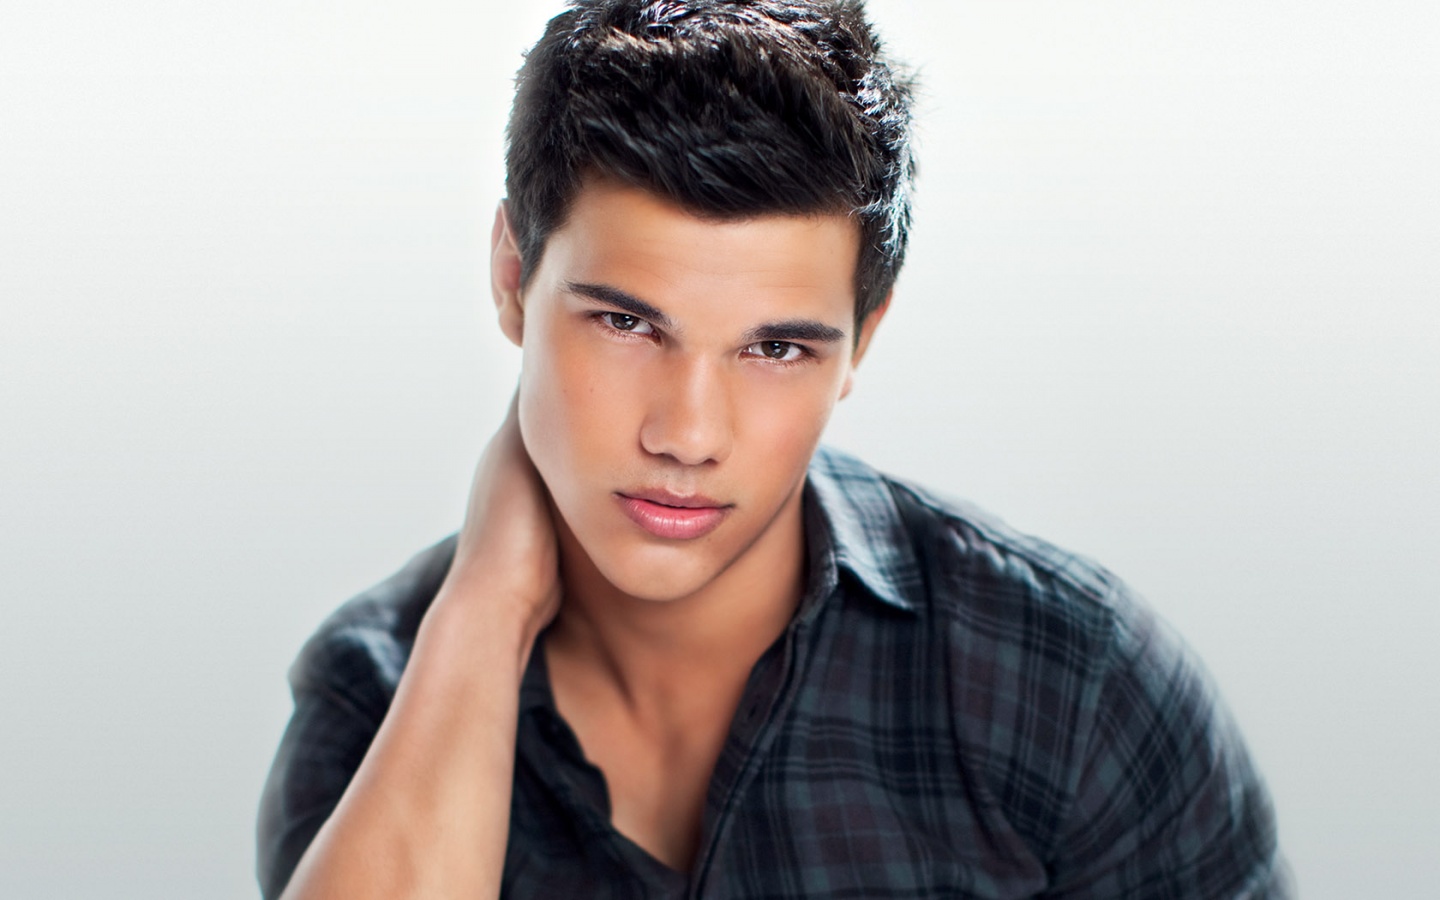 Hairstyles for men: Jacob Black - Hairstyles of the 